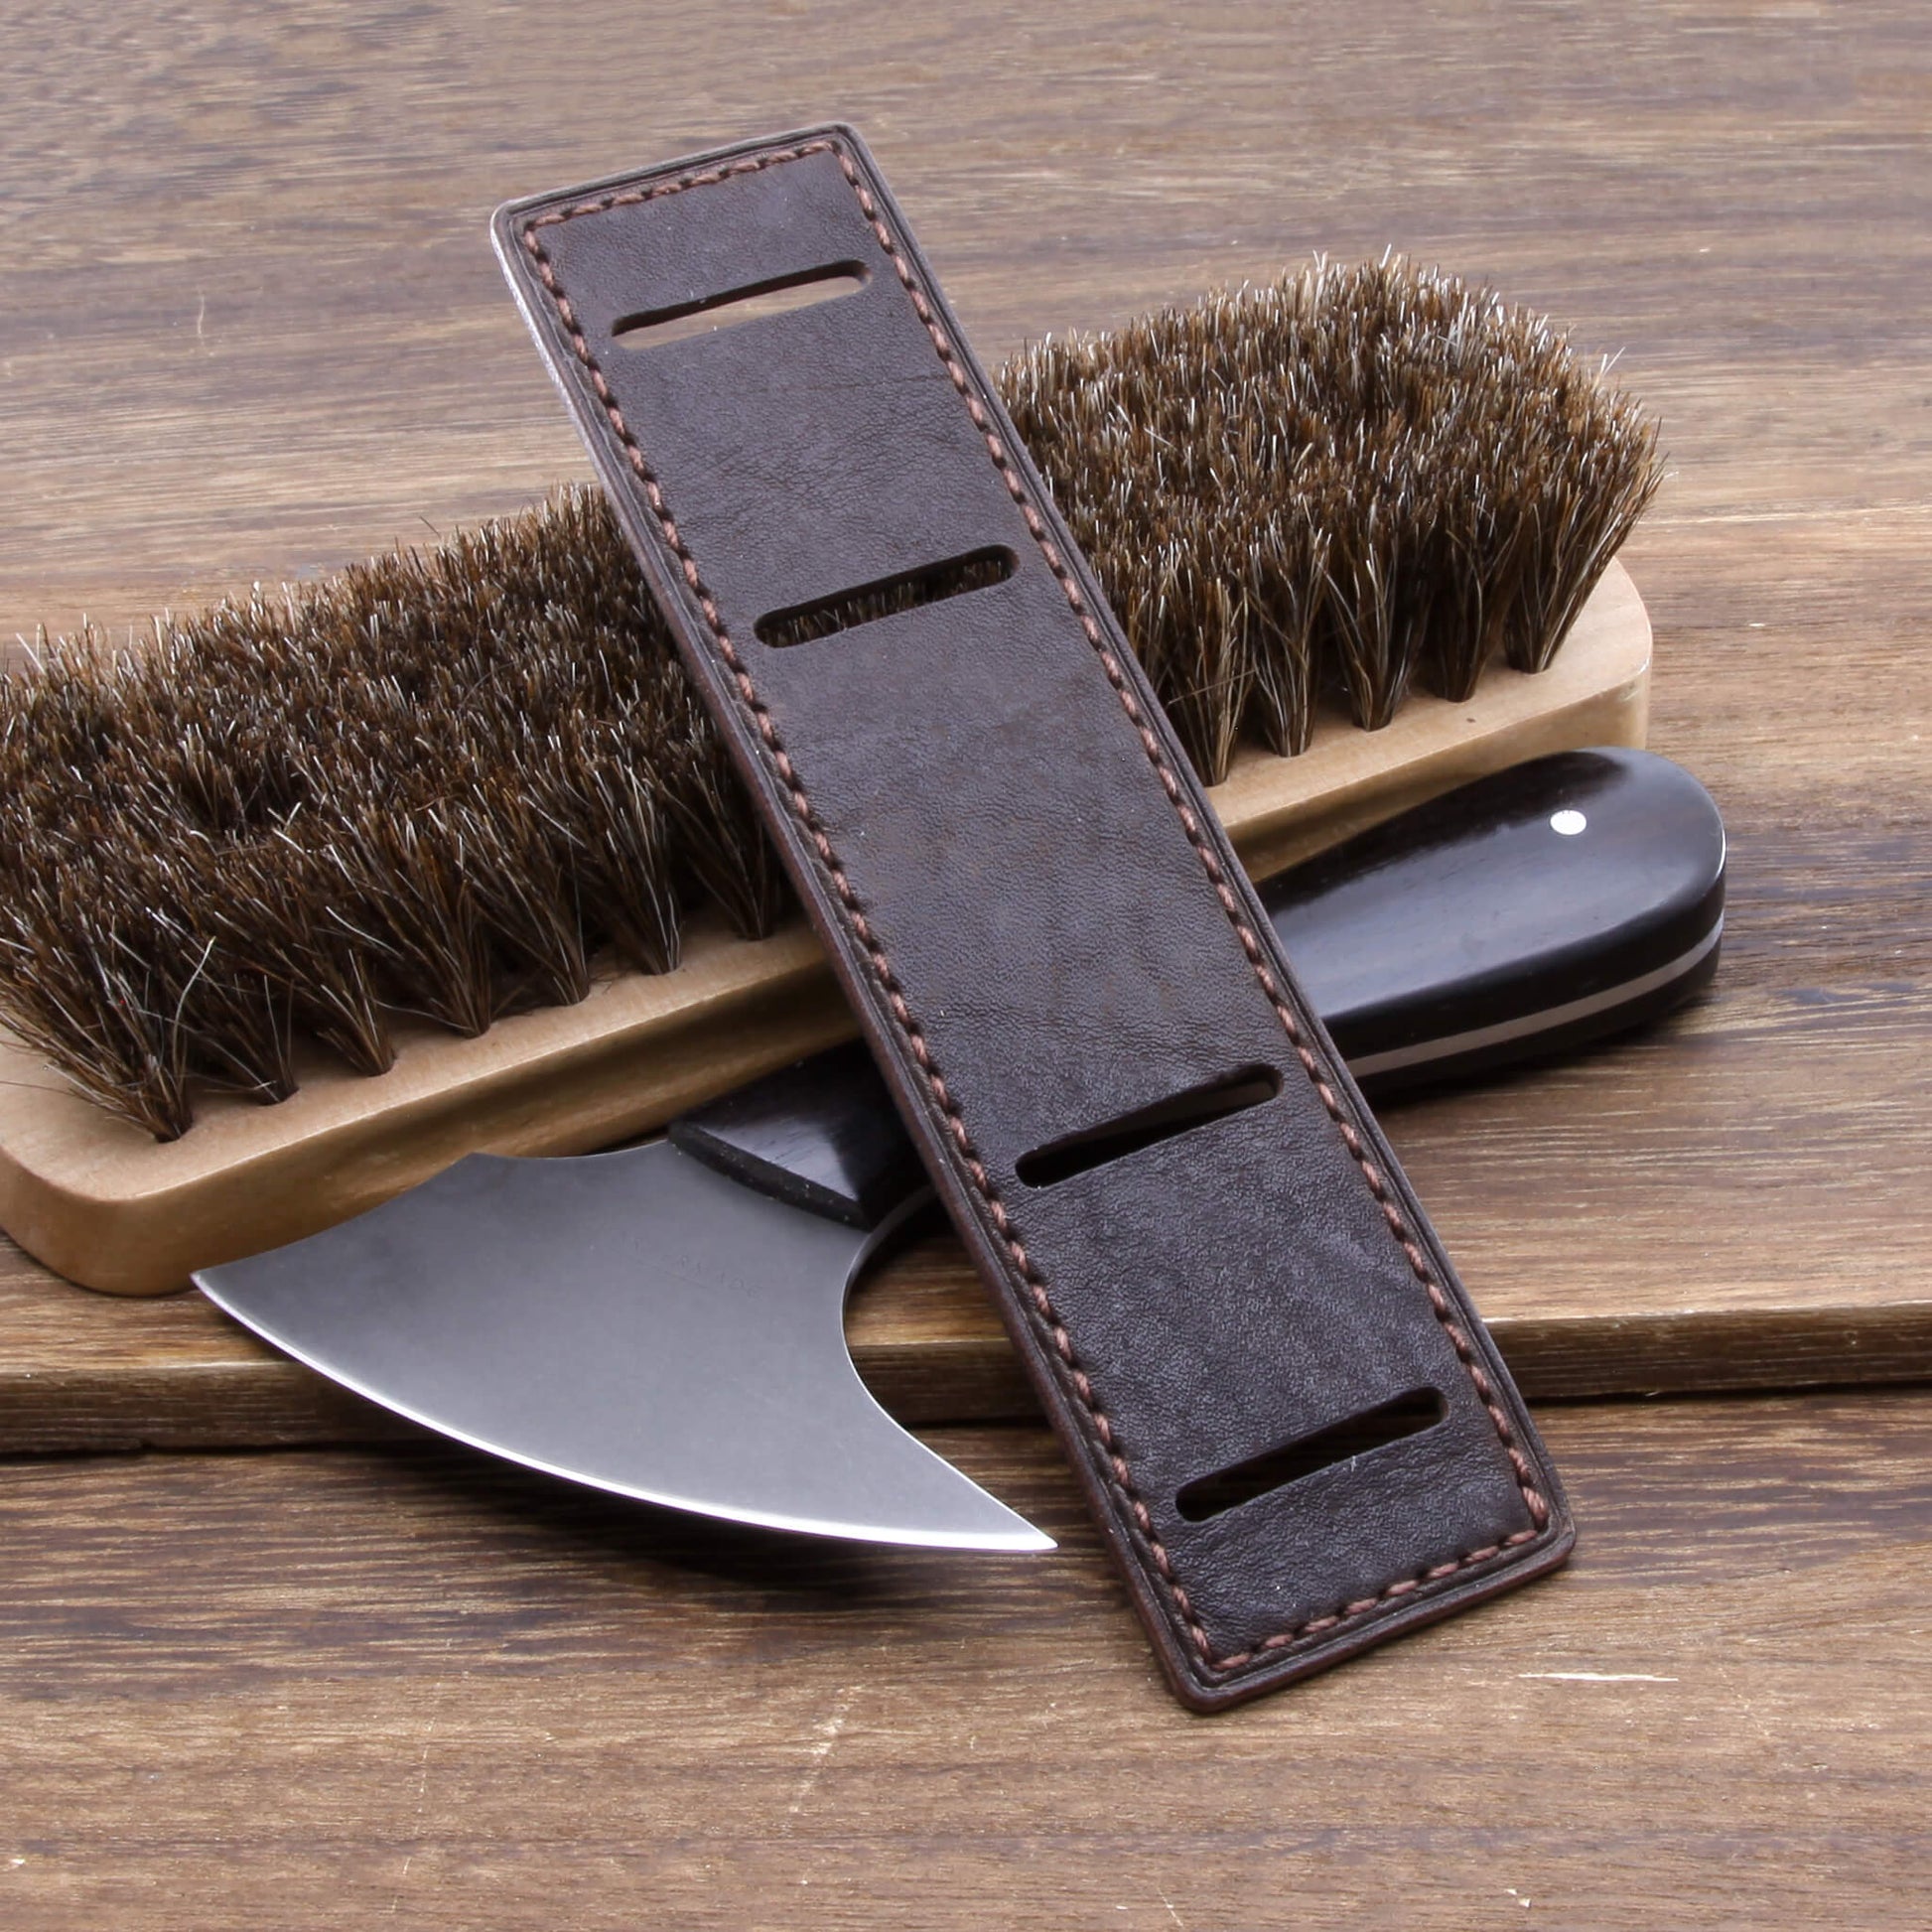 Top view of leather bund pad in Newman Style Vintage 406 Dark Brown | Full stitch construction, made with full grain Italian veg-tanned leather by Cozy Handmade